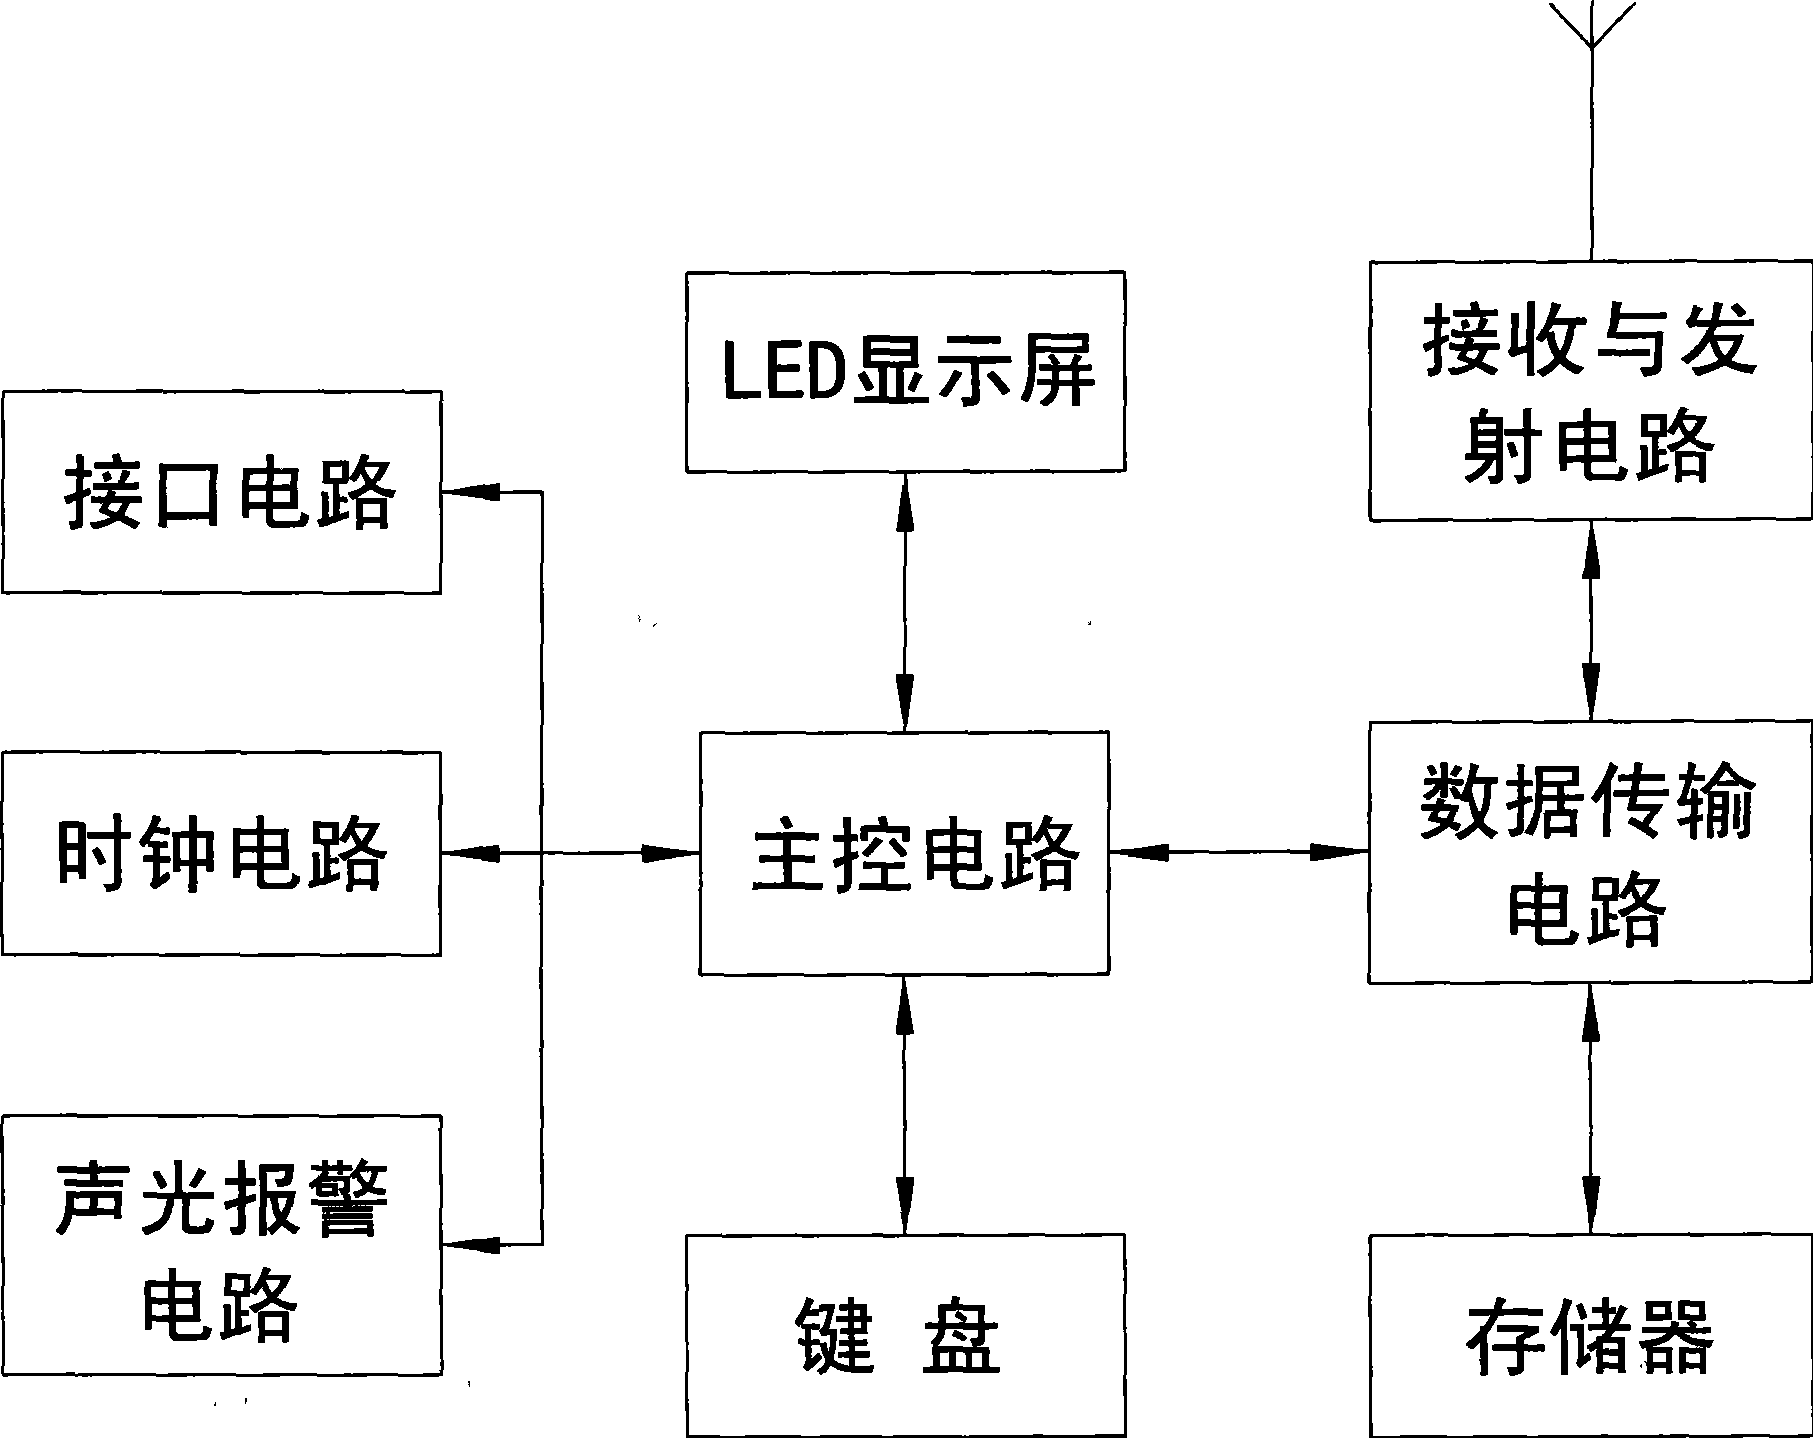 Antitheft alarm system for electric network power line